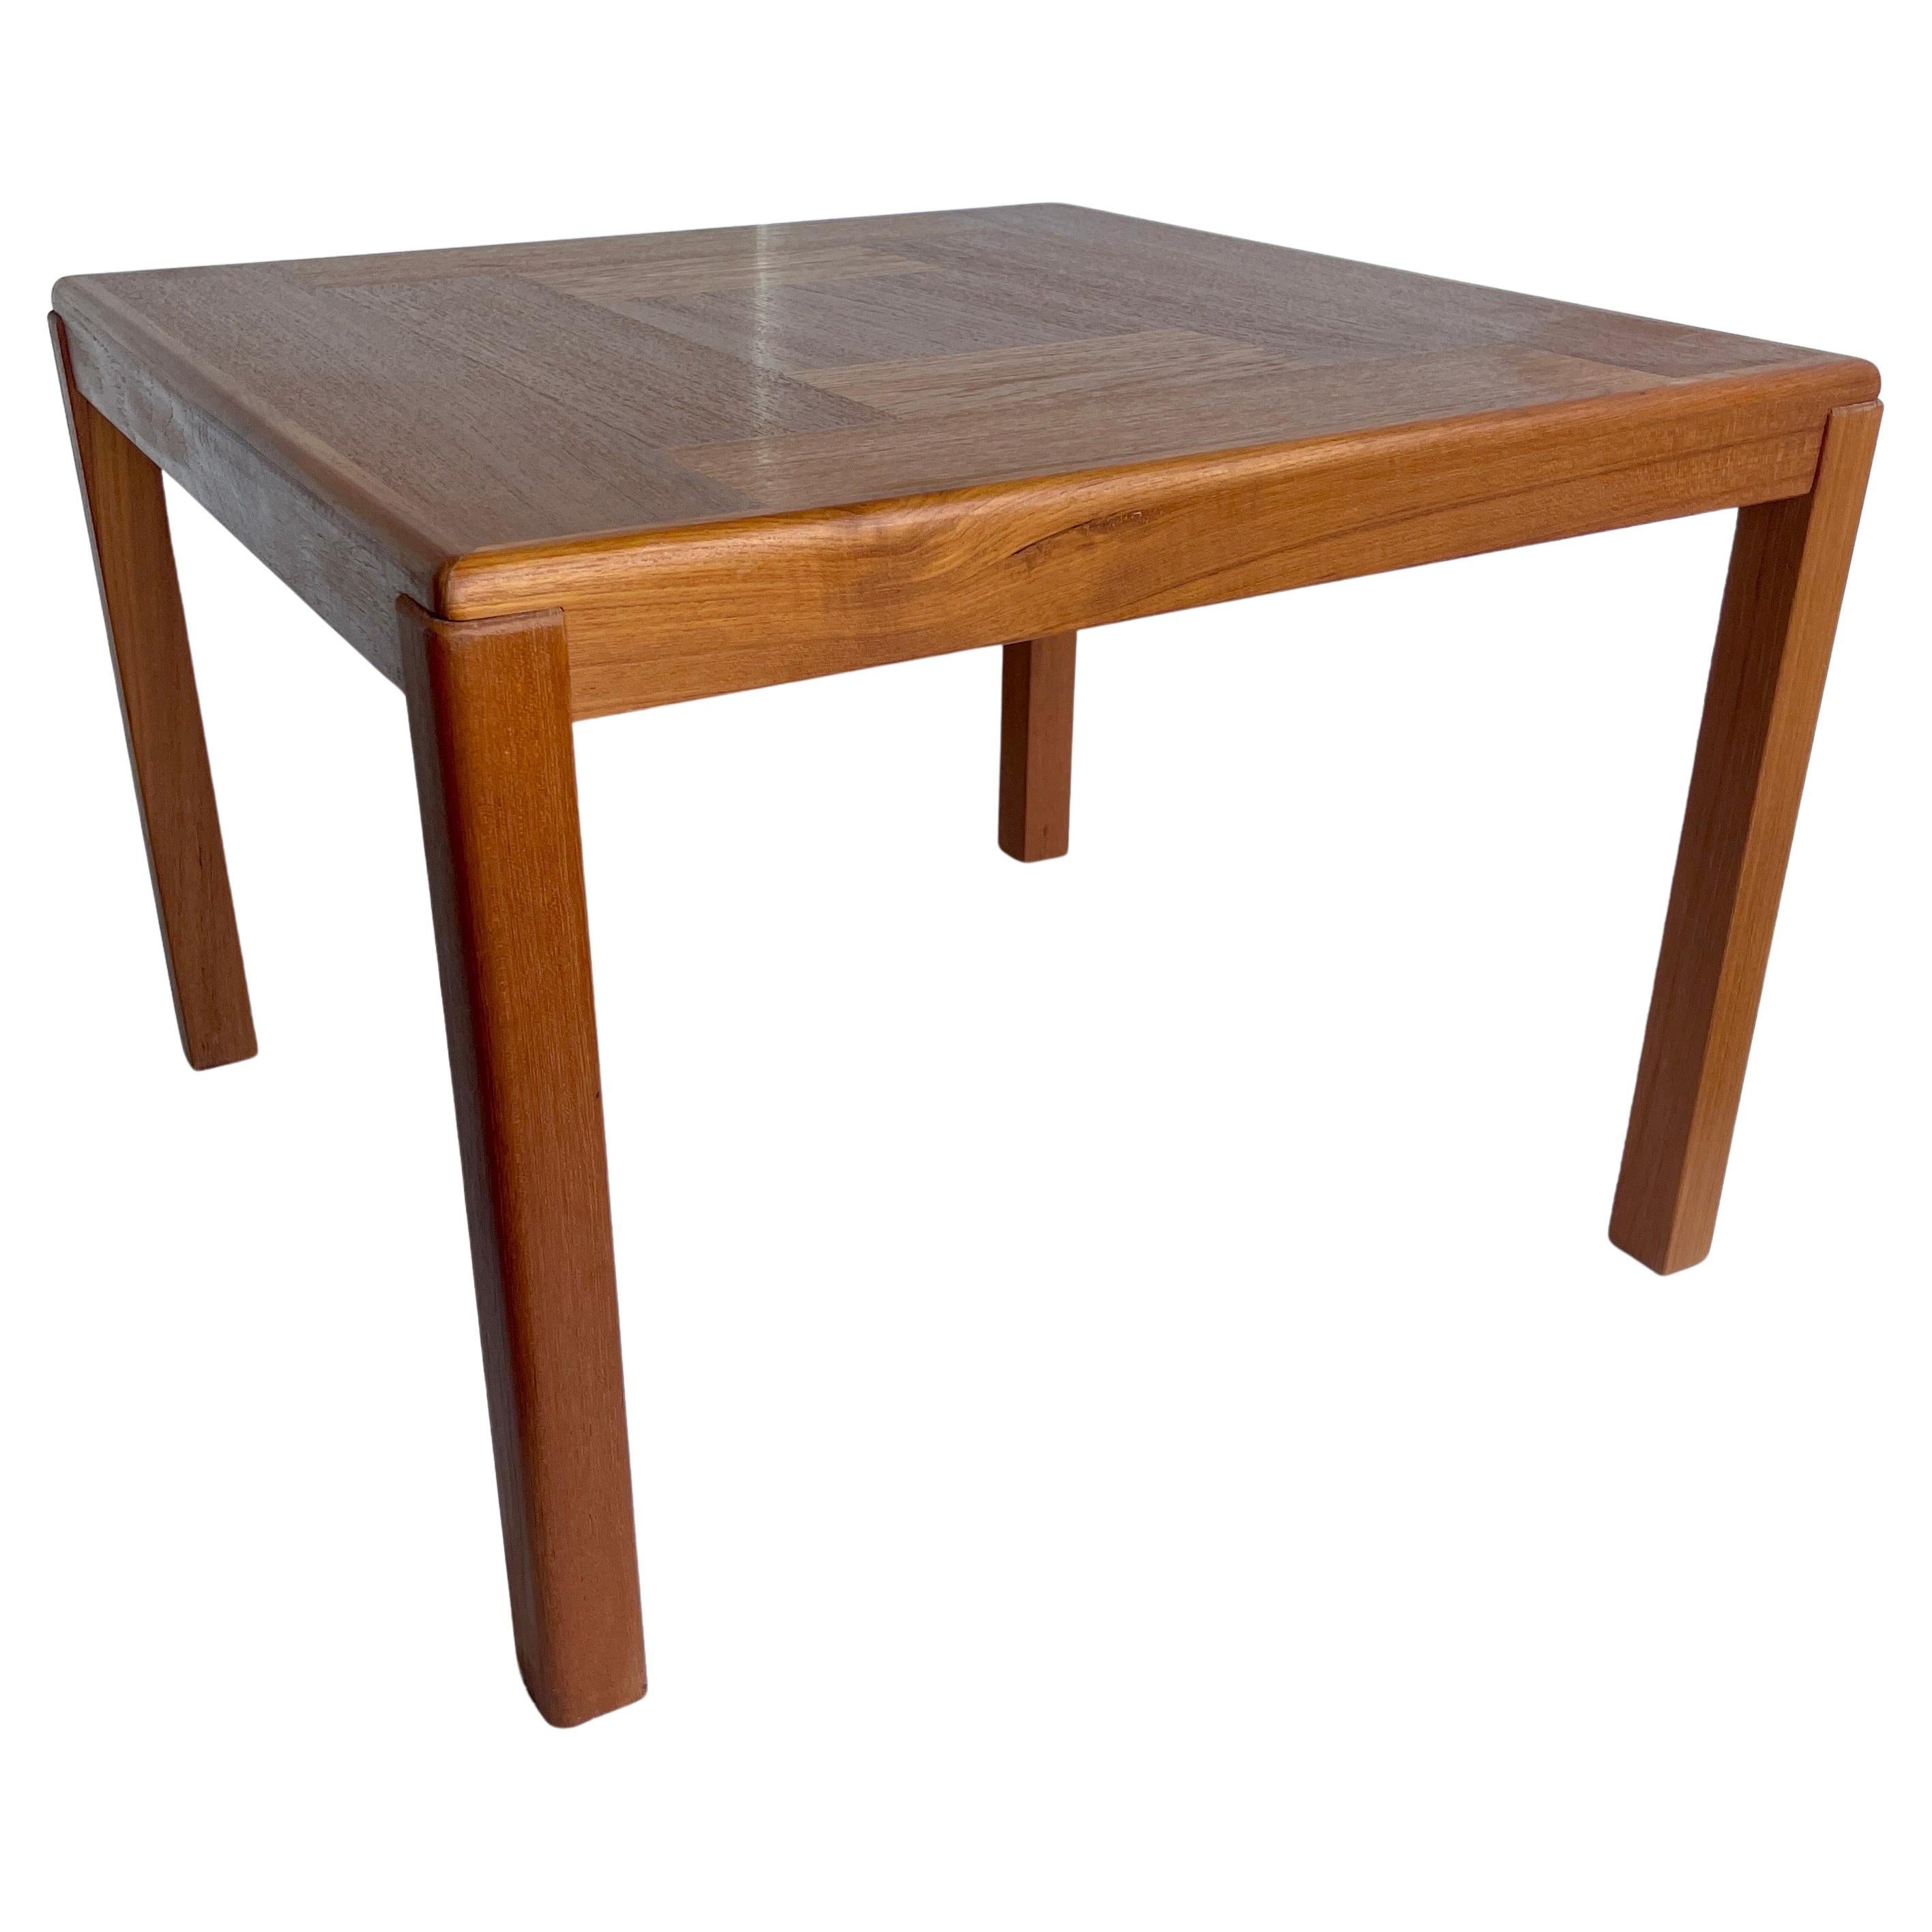 Square light teak wood coffee table in classical Scandinavian Modern style, manufactured by 